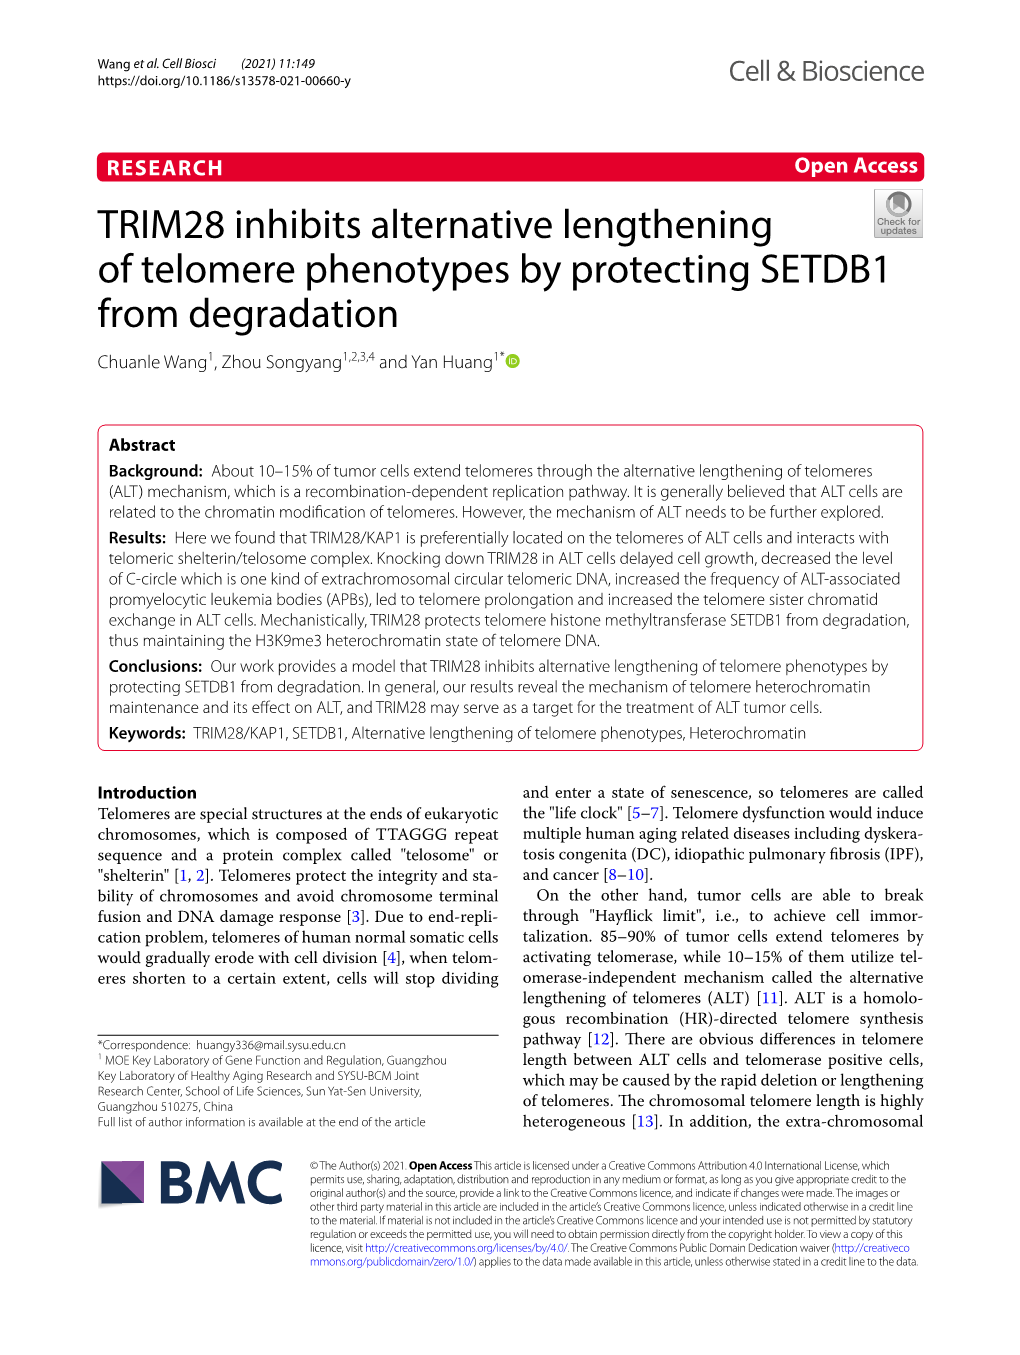 TRIM28 Inhibits Alternative Lengthening of Telomere Phenotypes by Protecting SETDB1 from Degradation Chuanle Wang1, Zhou Songyang1,2,3,4 and Yan Huang1*